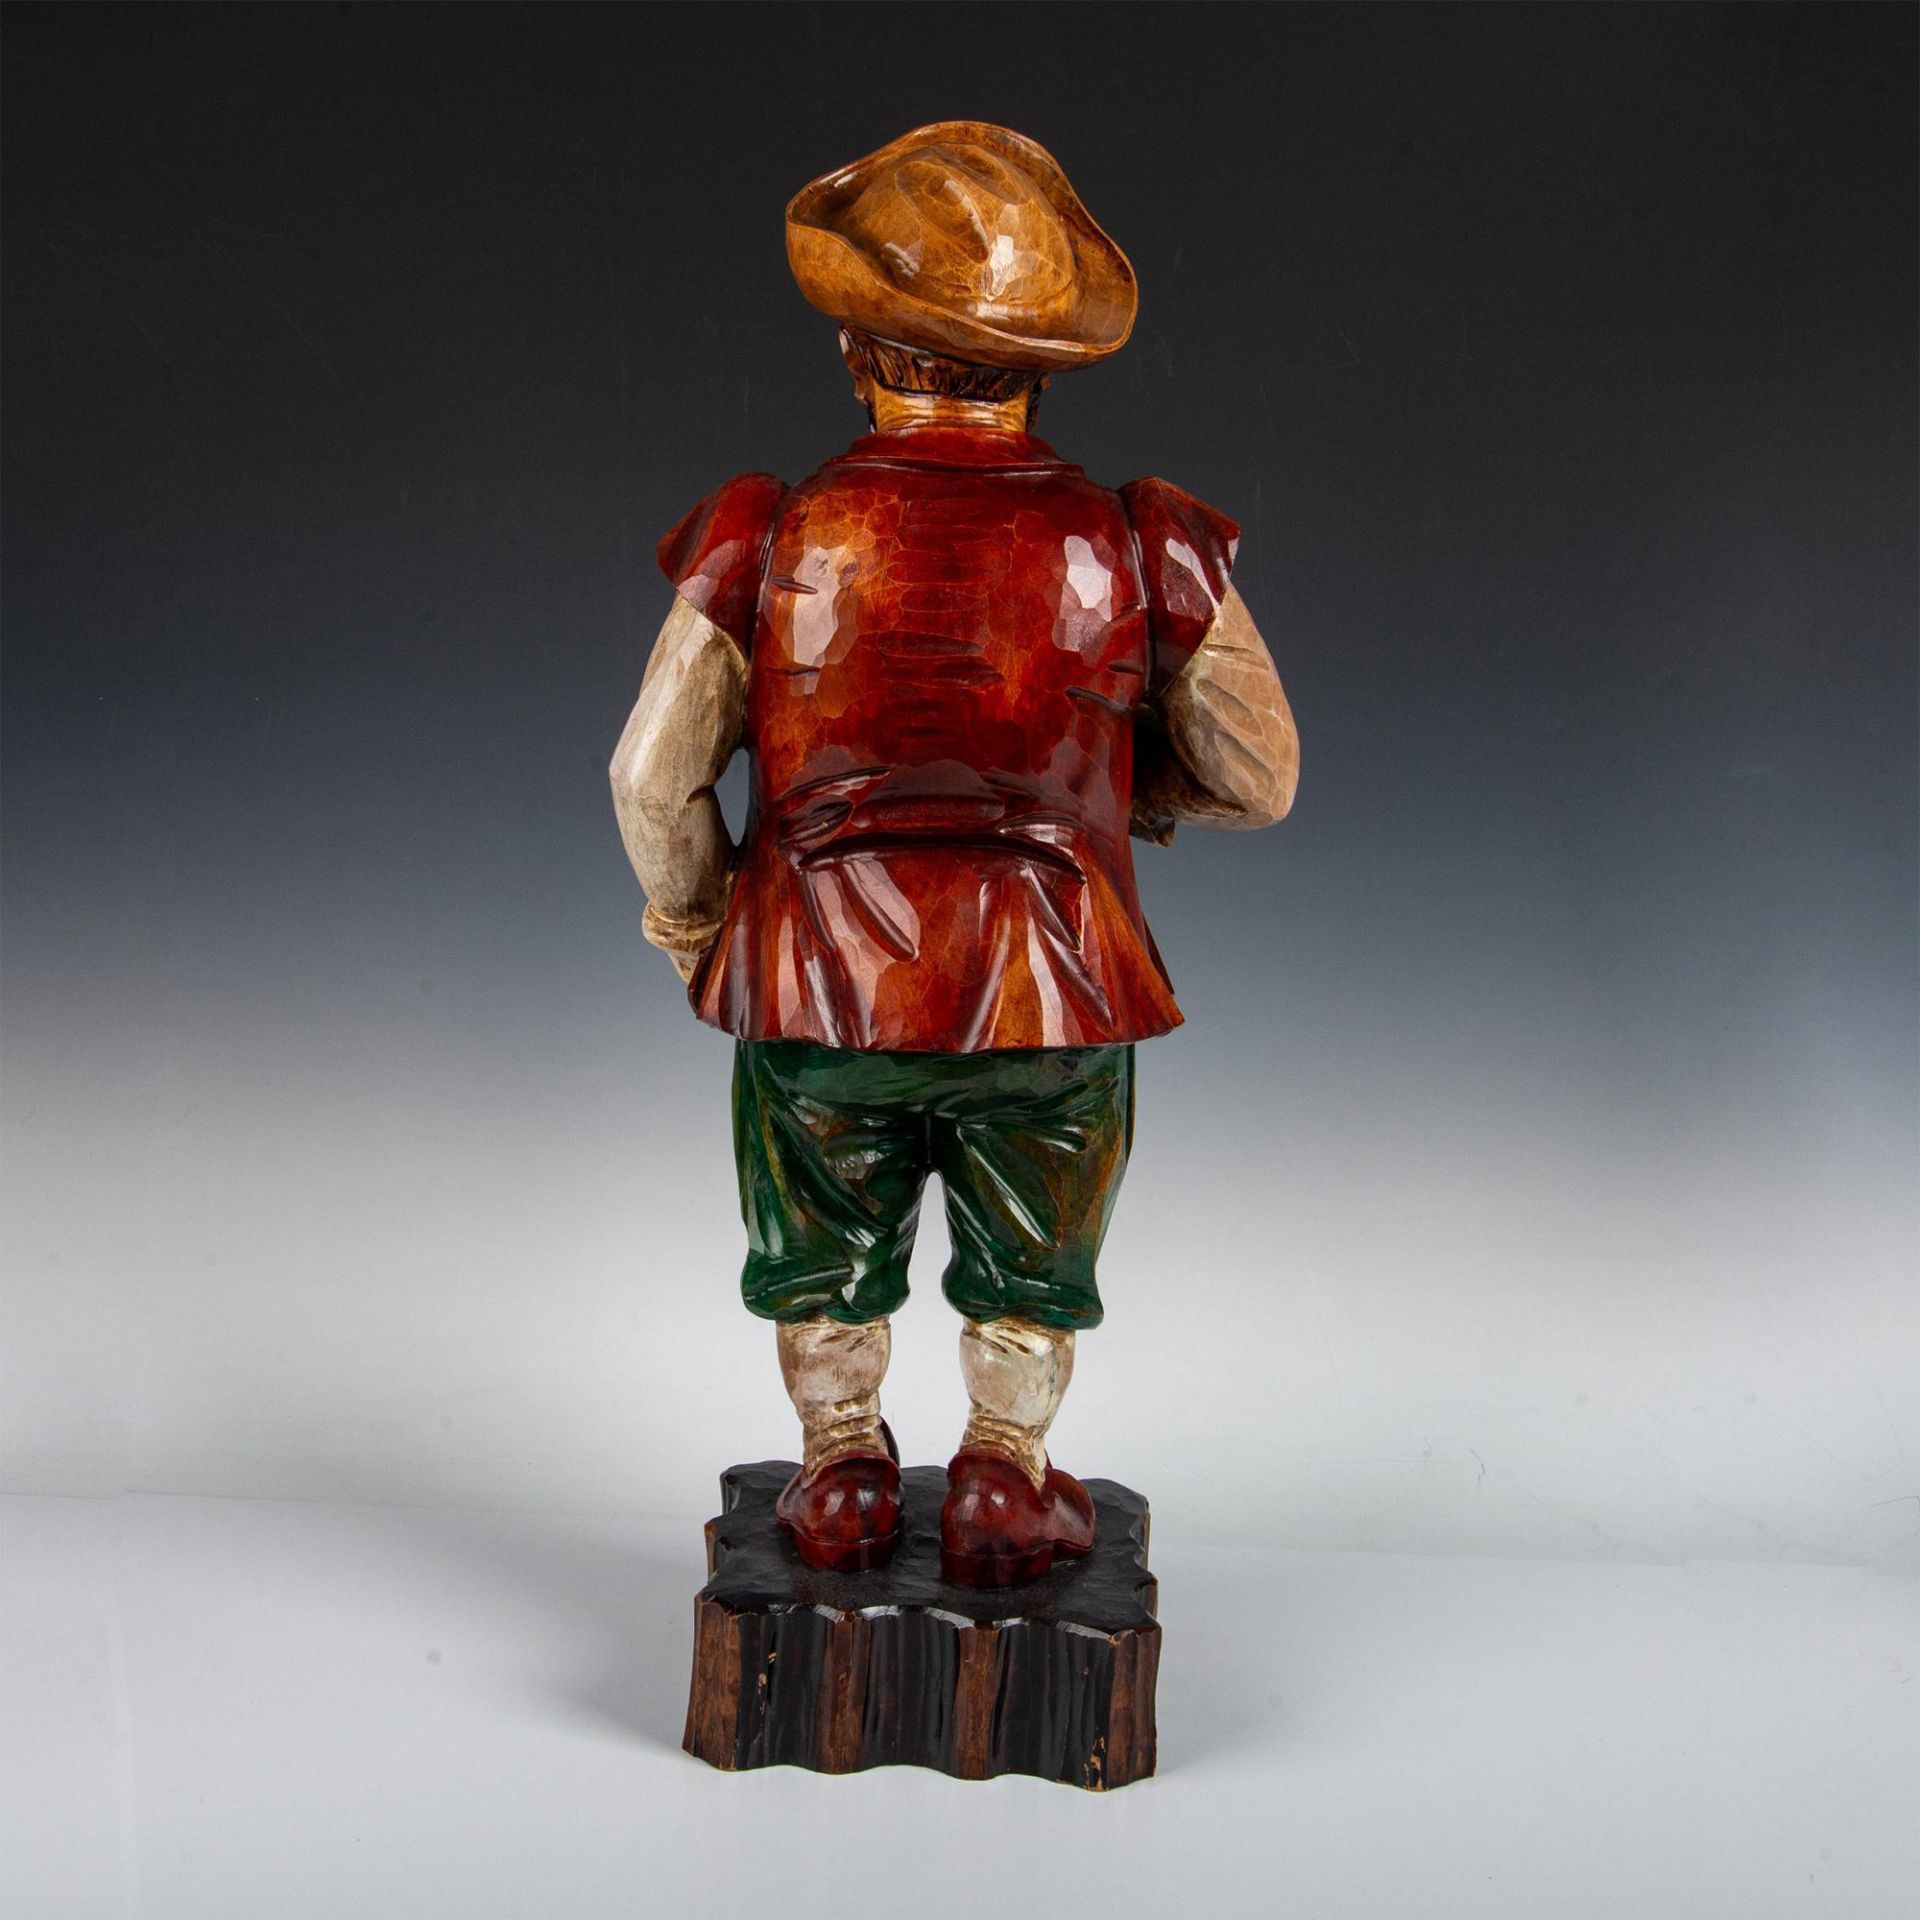 Ouro Artesania Carved Wooden Sancho Panza Sculpture - Image 4 of 5